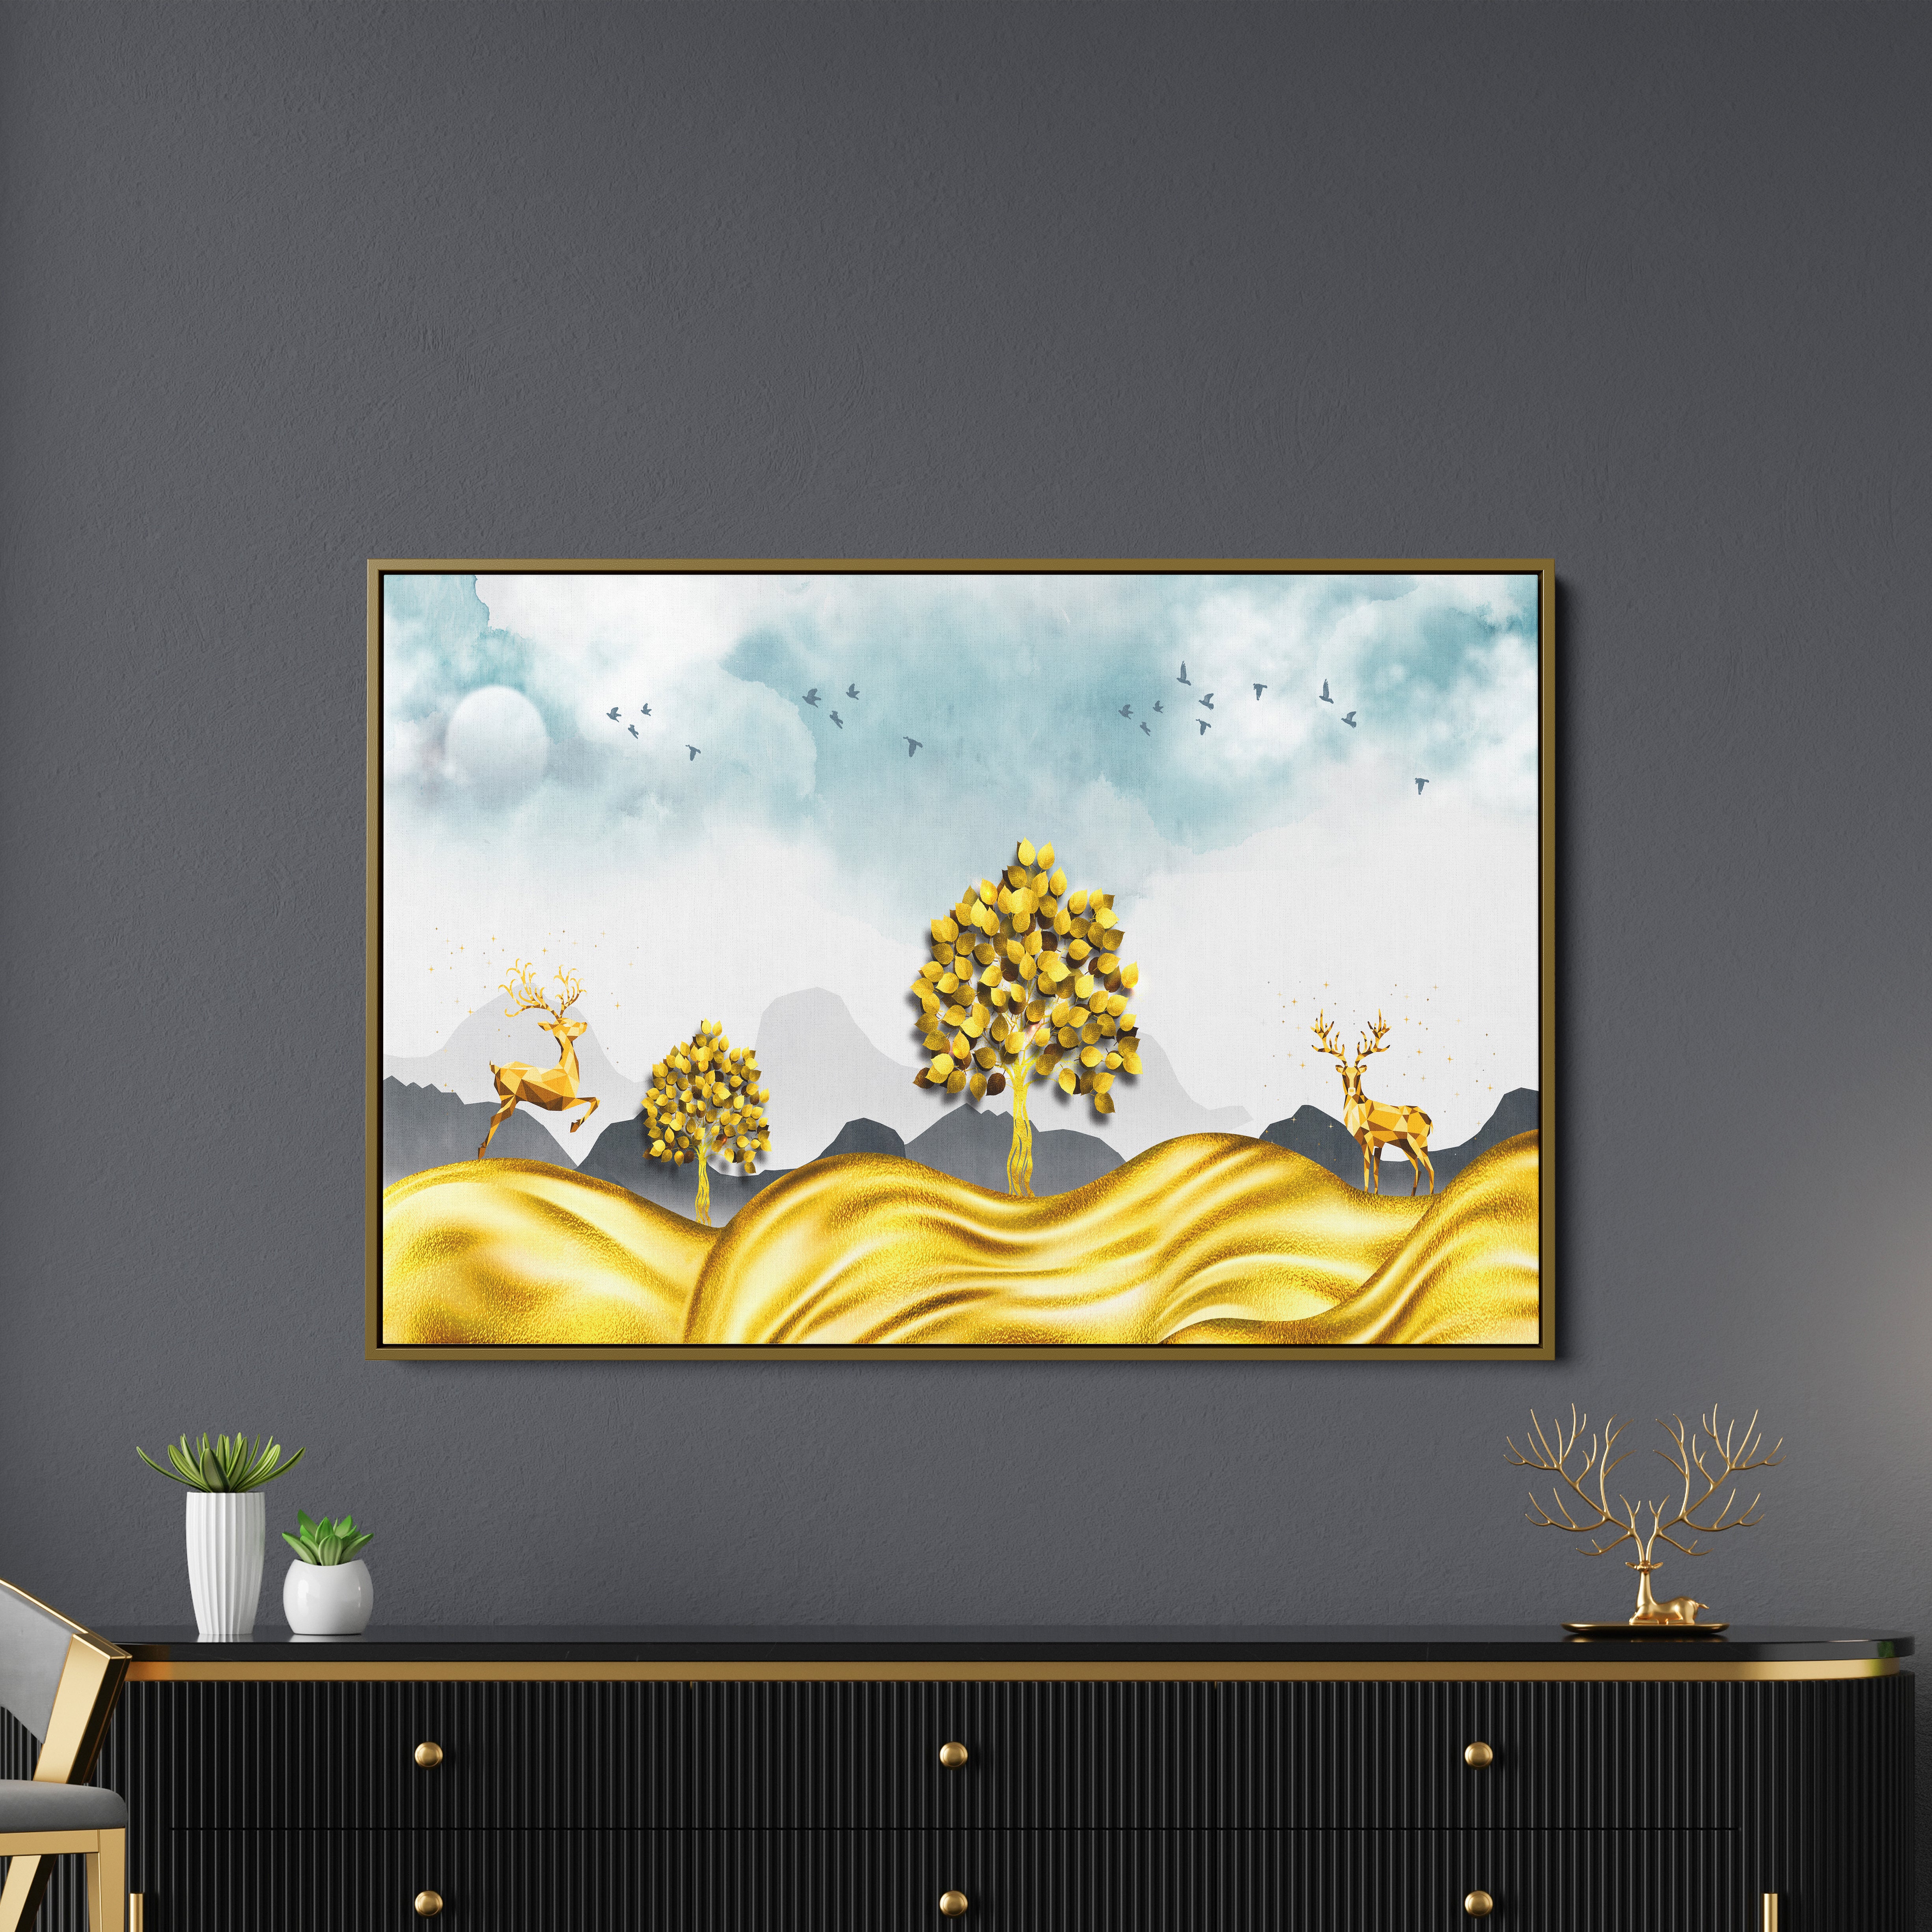 Golden Tree And Deer Canvas Wall Painting